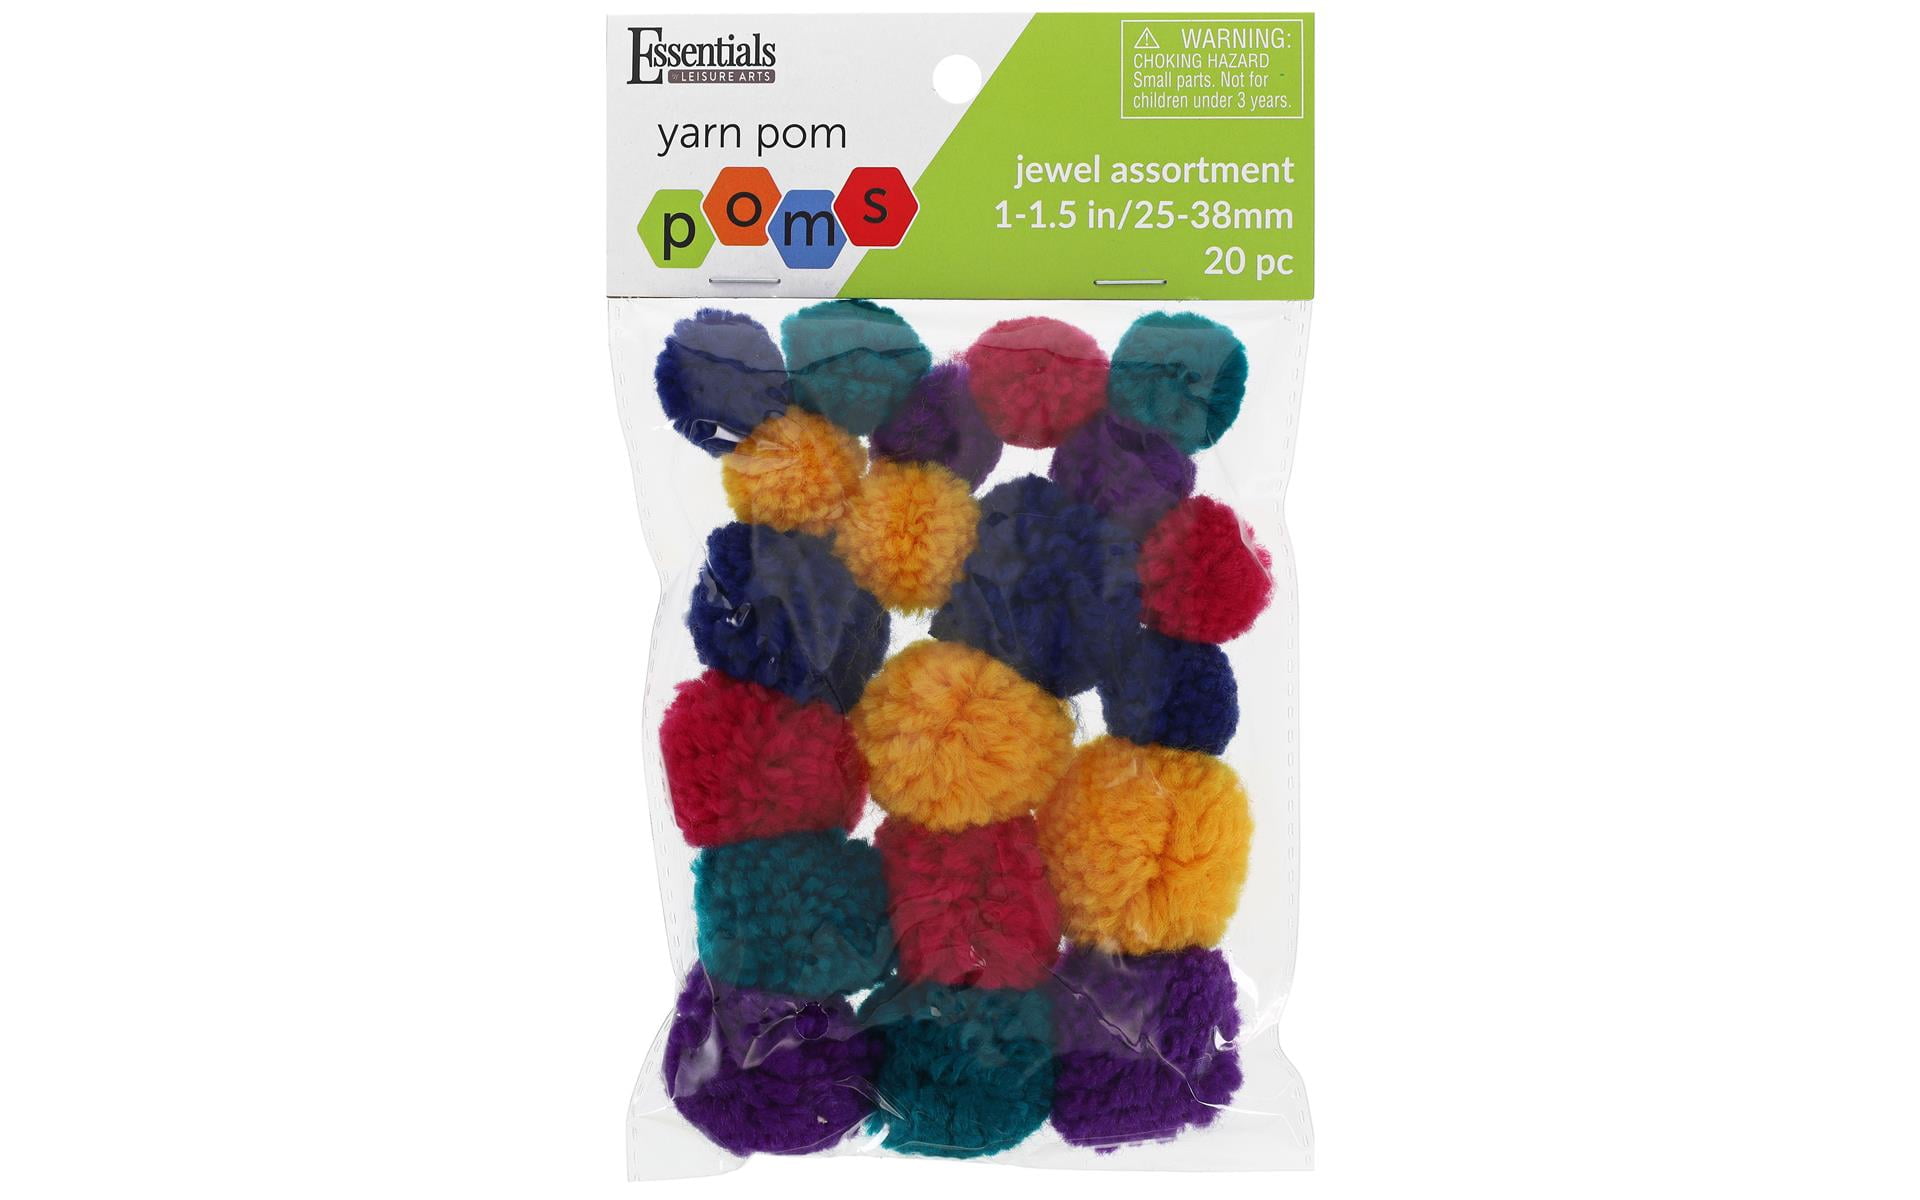 Essentials by Leisure Arts Pom Poms - Glitter Multi-colored - 1/2 - 20  piece pom poms arts and crafts - colored pompoms for crafts - craft pom poms  - puff balls for crafts 